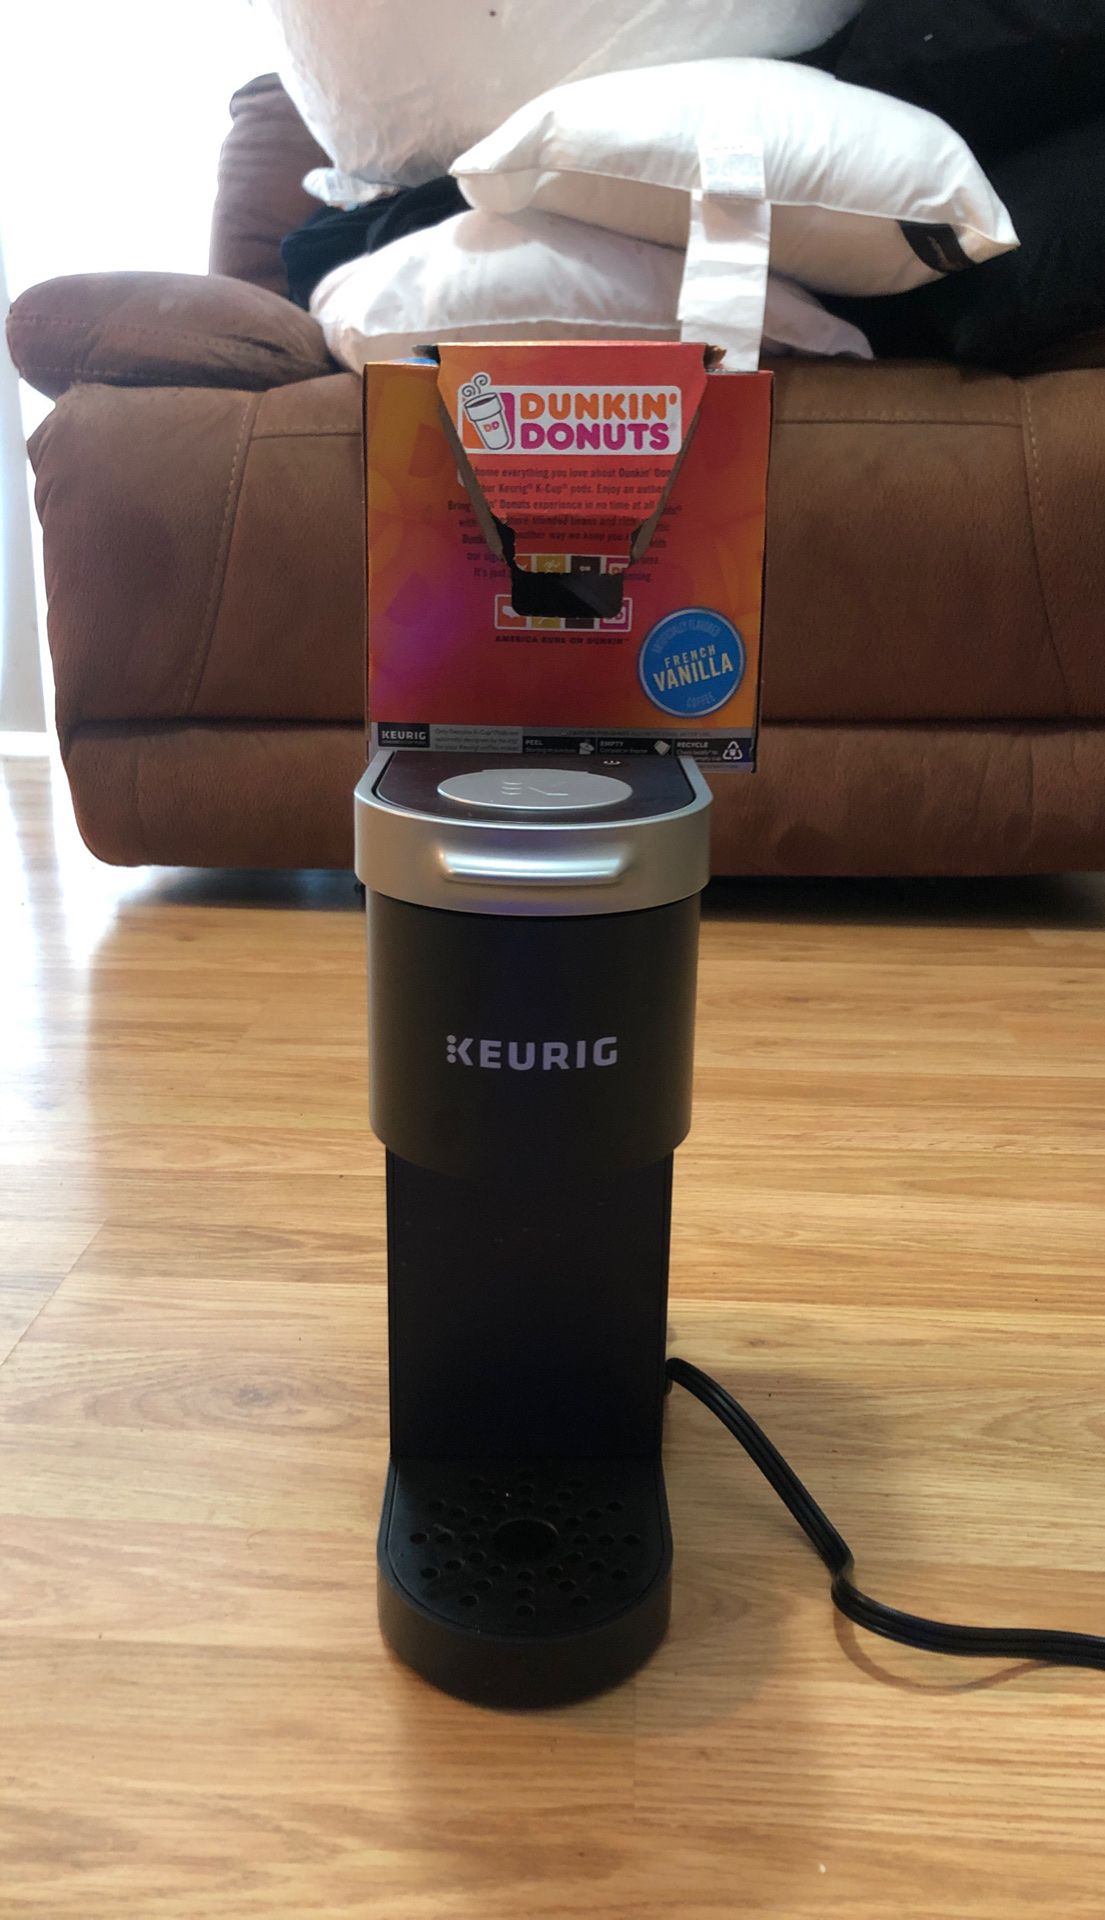 Keurig with Dunkin Donuts coffee